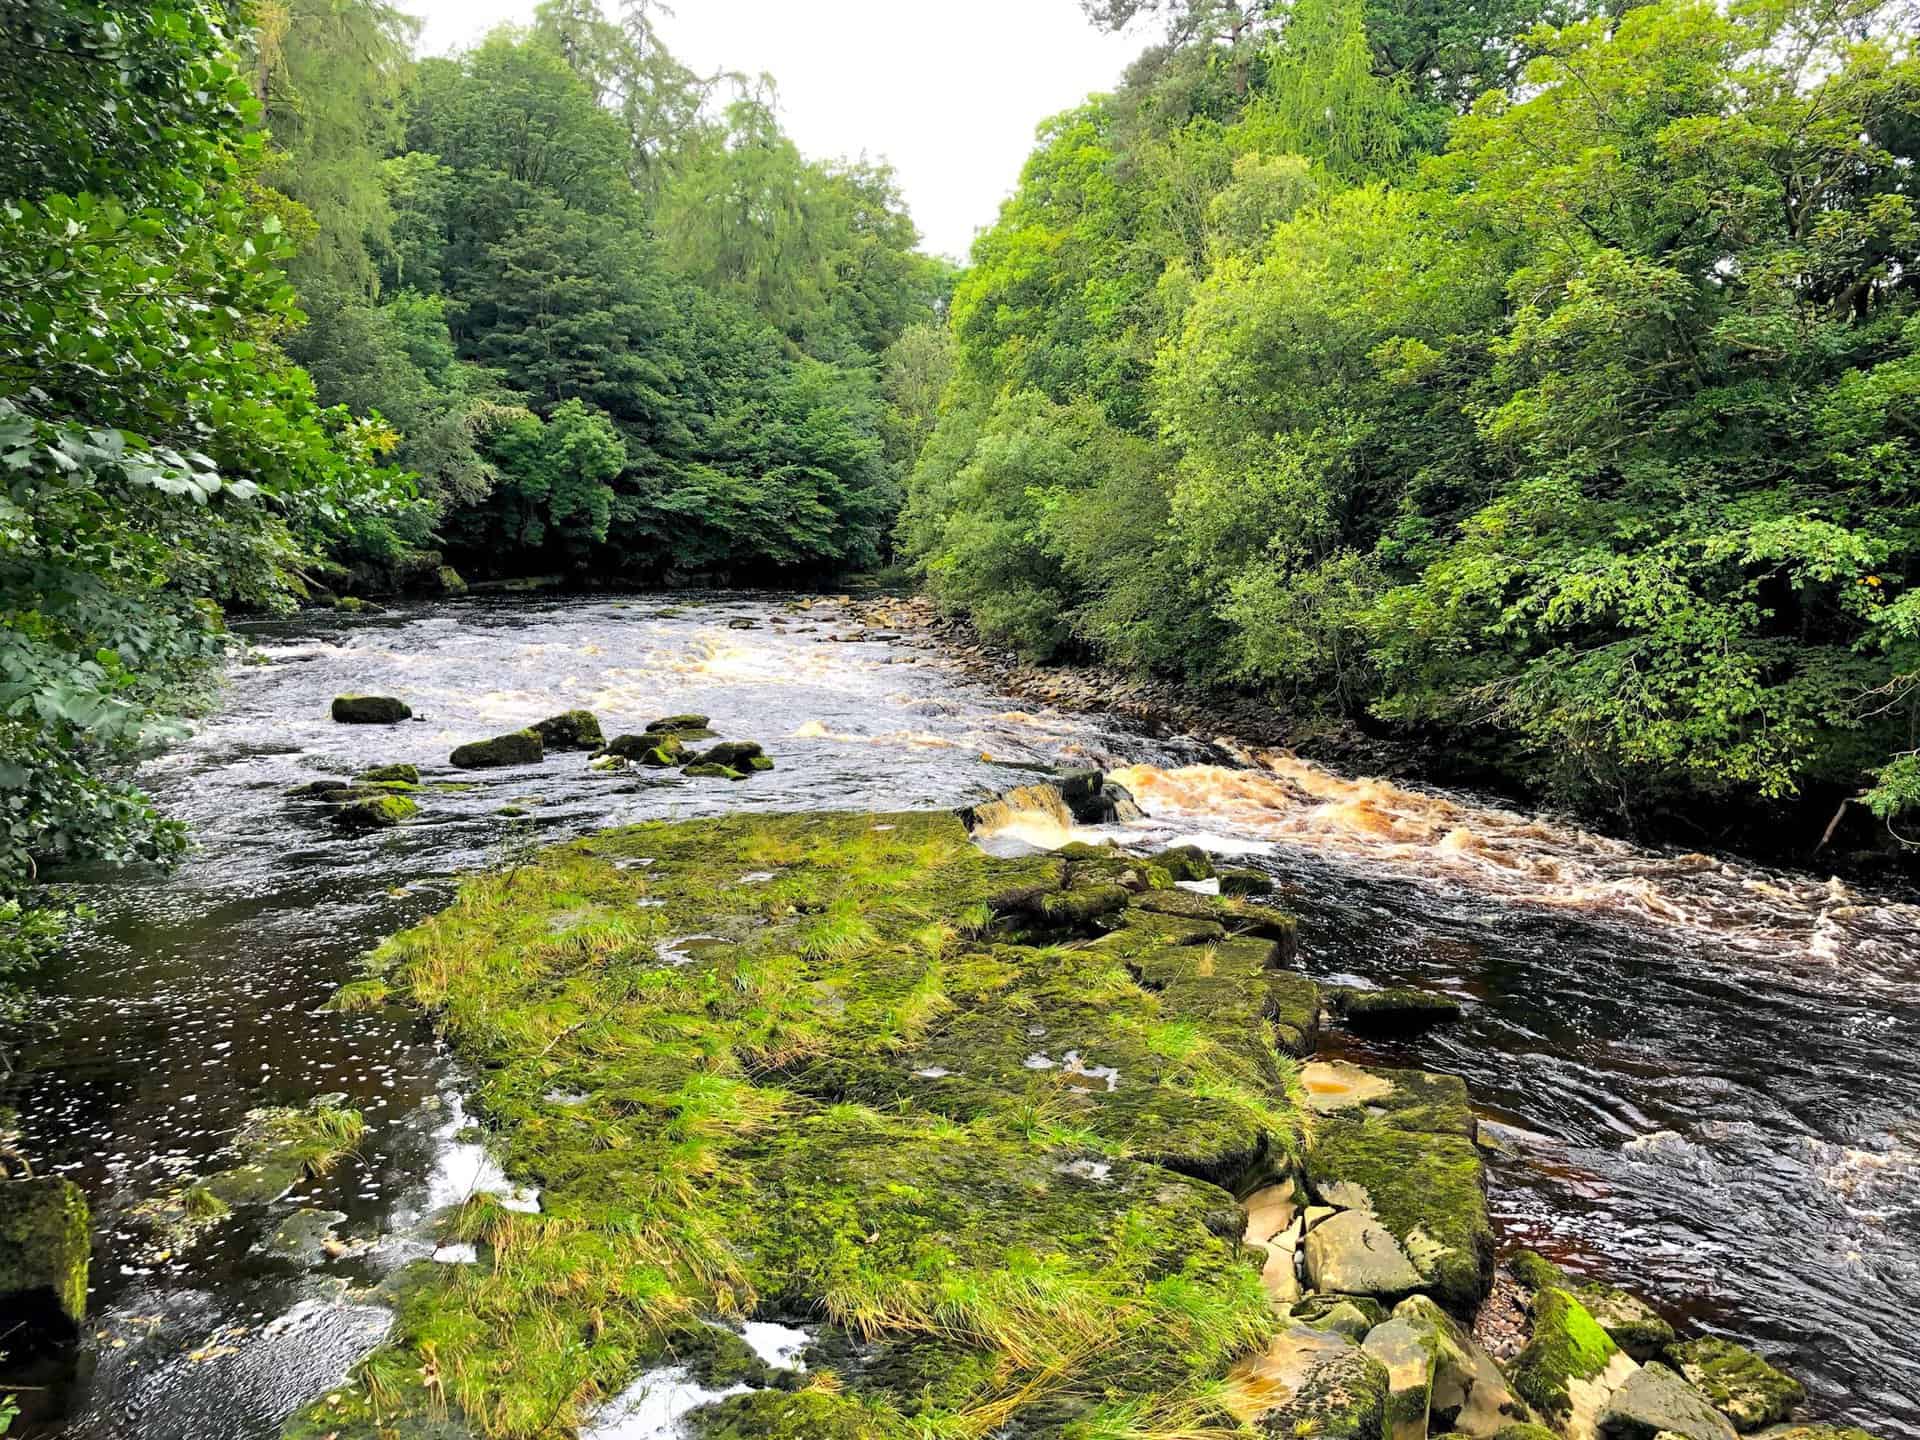 The tranquil stretch of the River Tees between Cotherstone and Romaldkirk, ideal for a leisurely stroll.